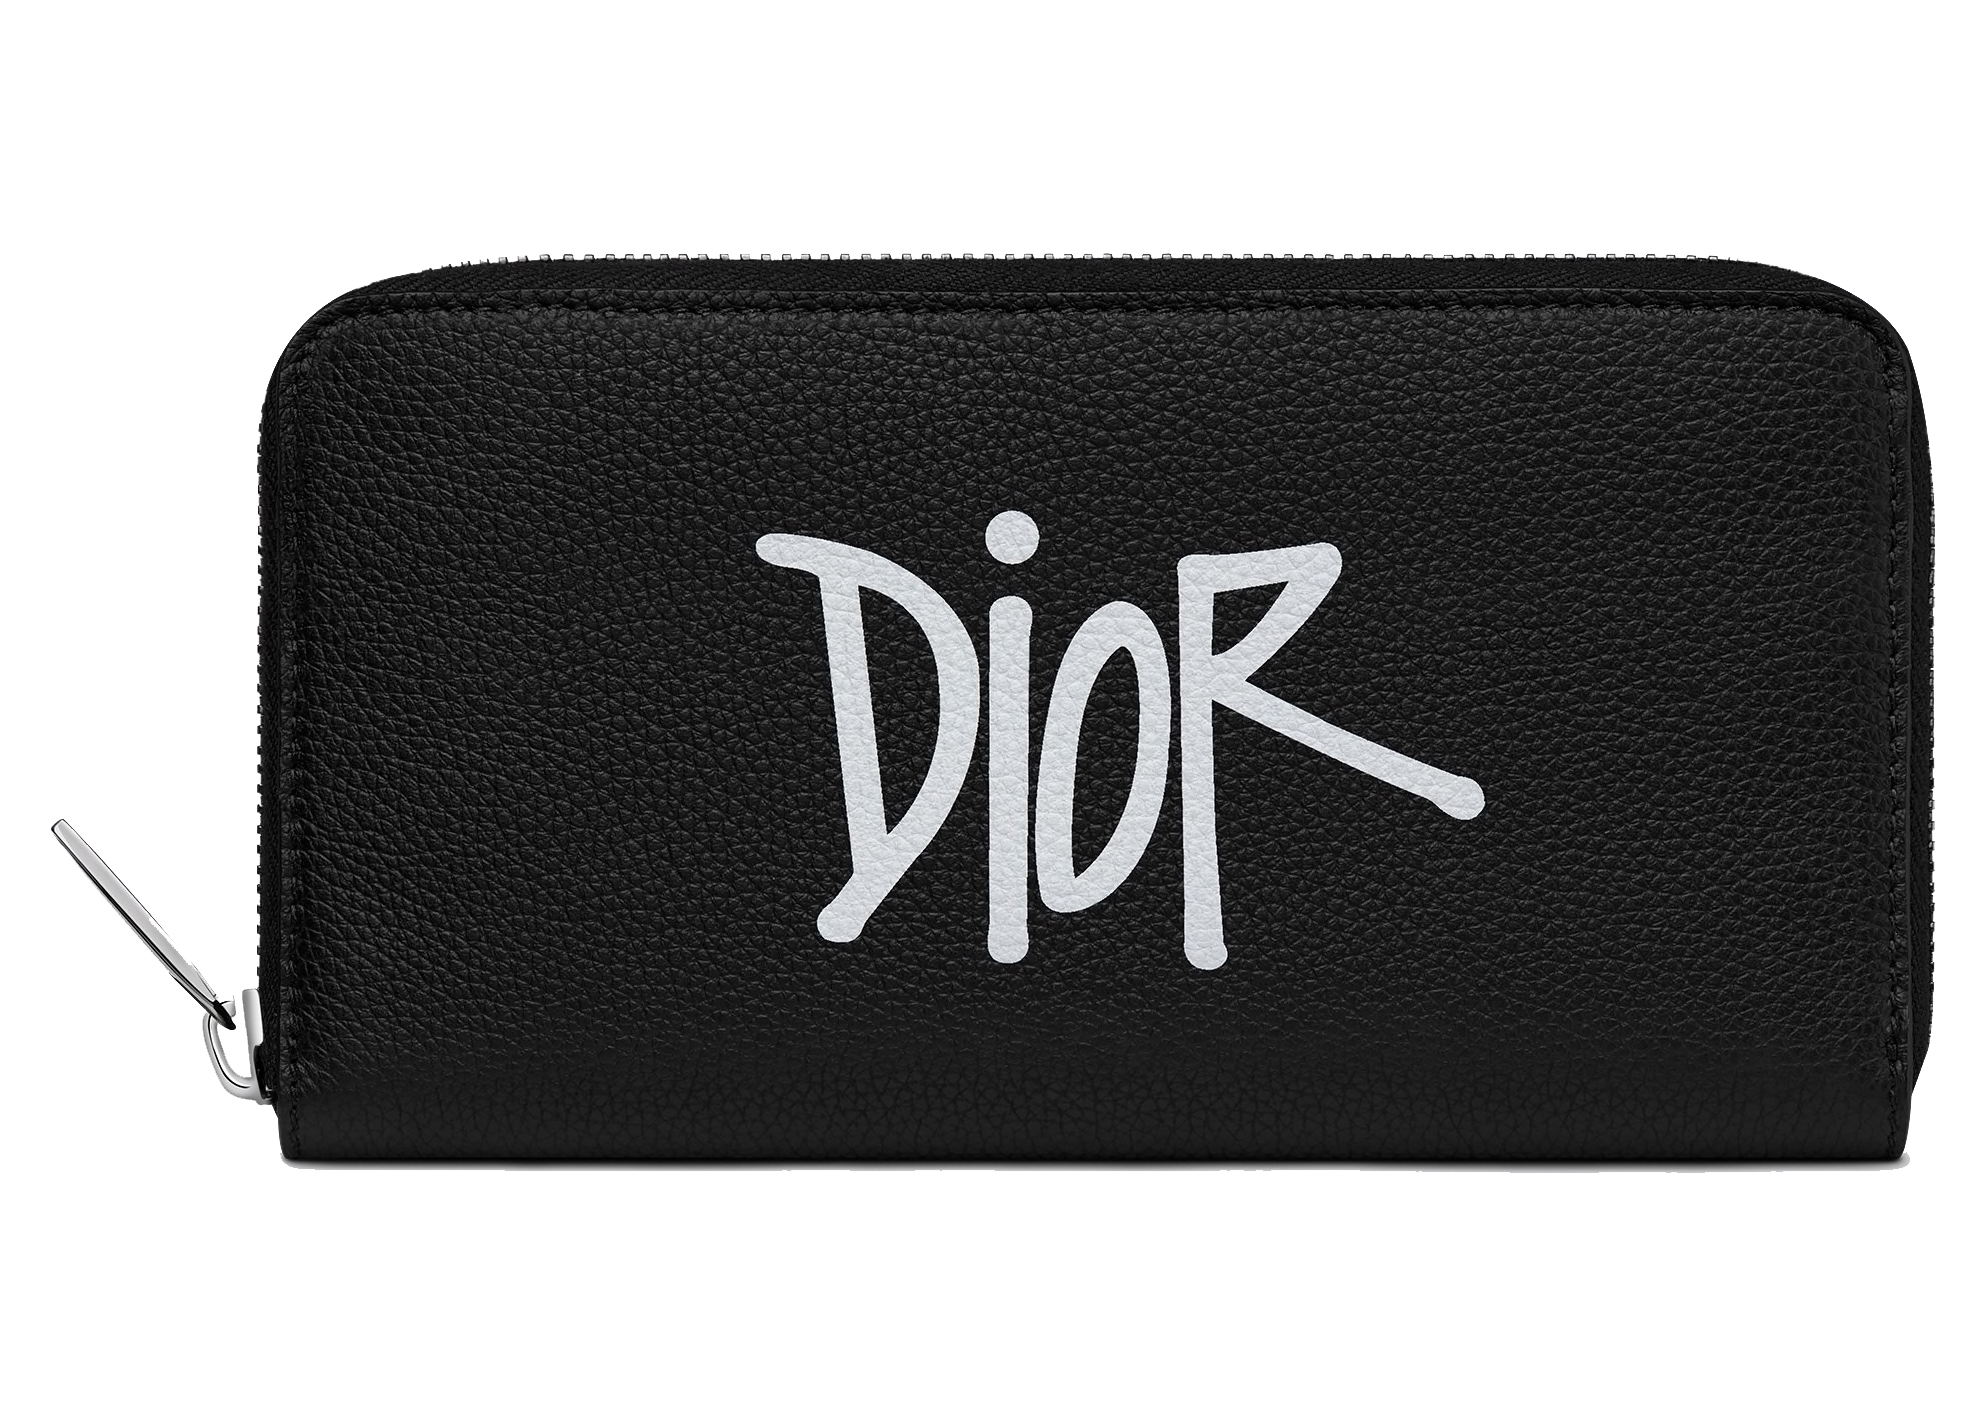 Dior And Shawn Long Zipped Wallet Black in Grained Calfskin with 